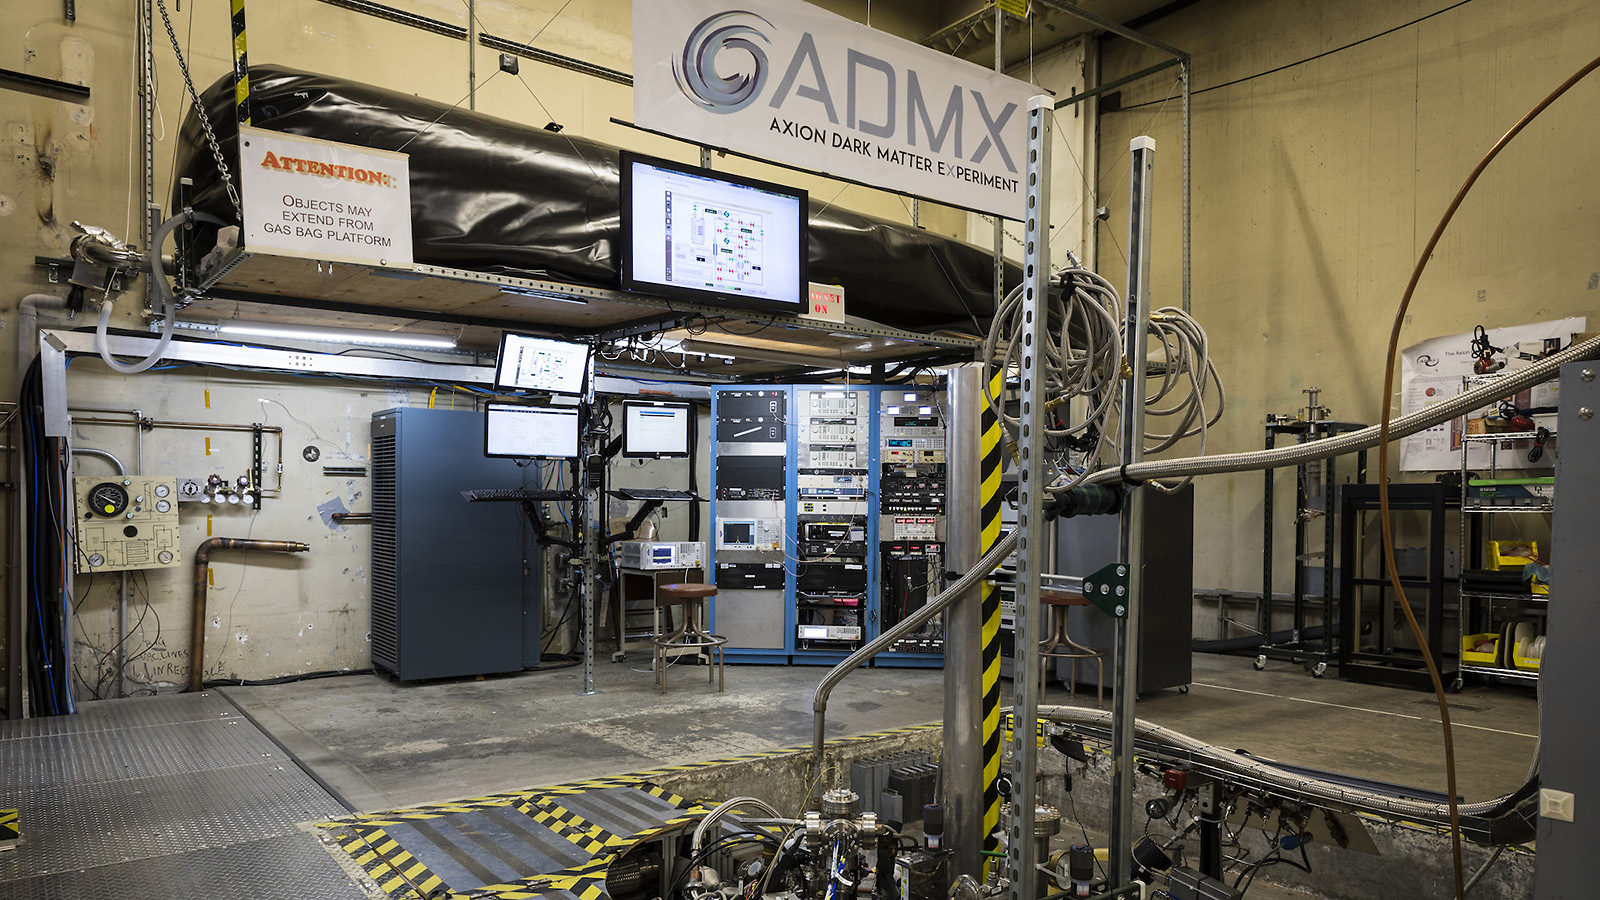 Photo of equipment and panels for the ADMX experiment fill the room: an ADMX experiment banner hangs above